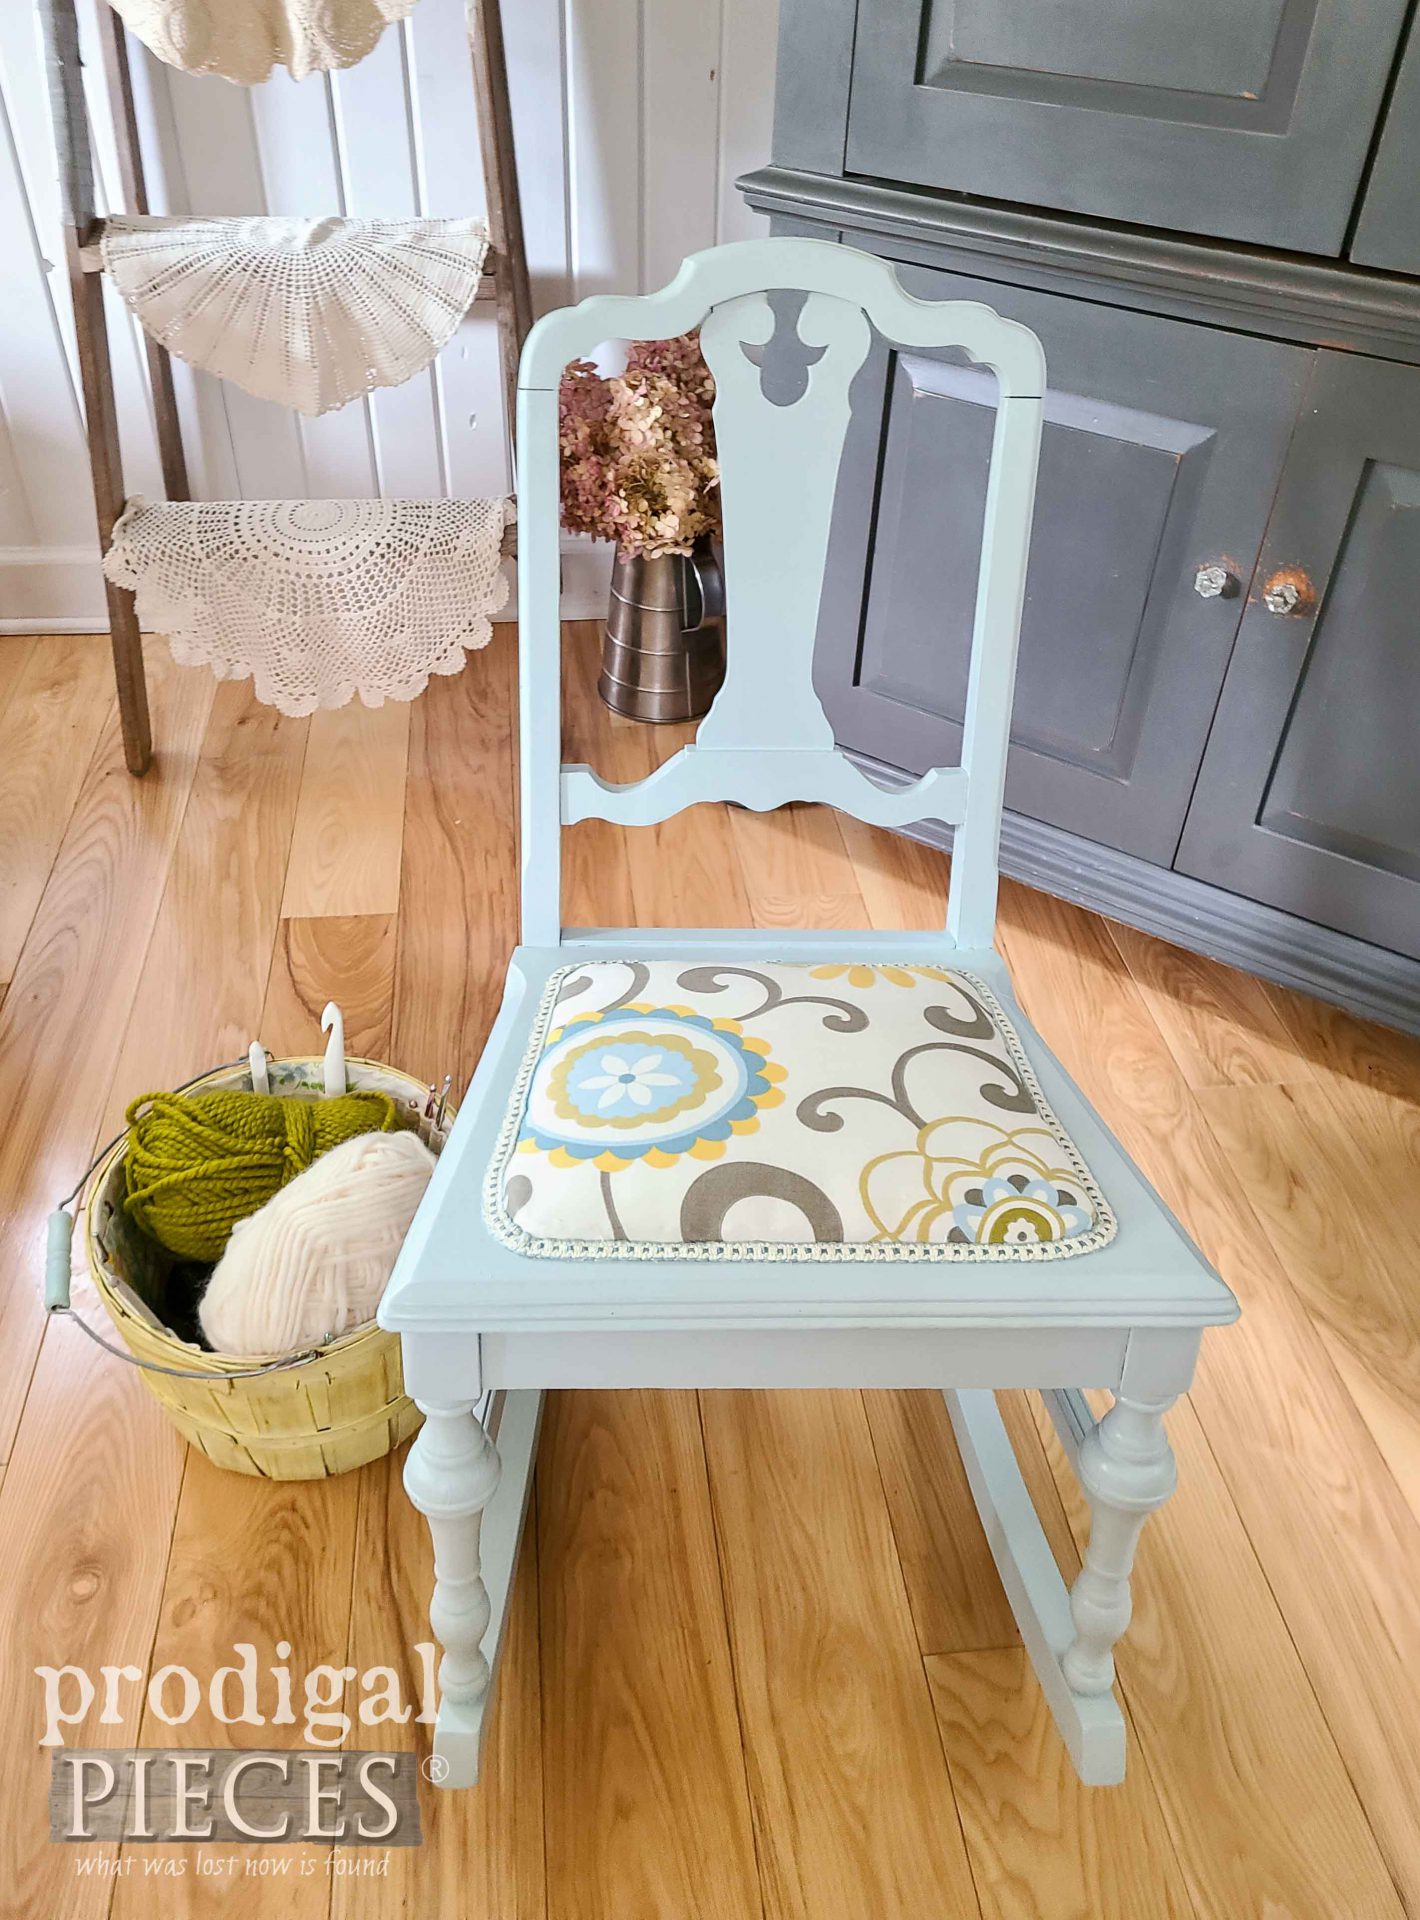 Upholstered Antique Sewing Rocking Chair by Larissa of Prodigal Pieces | prodigalpieces.com #prodigalpieces #chair #antique